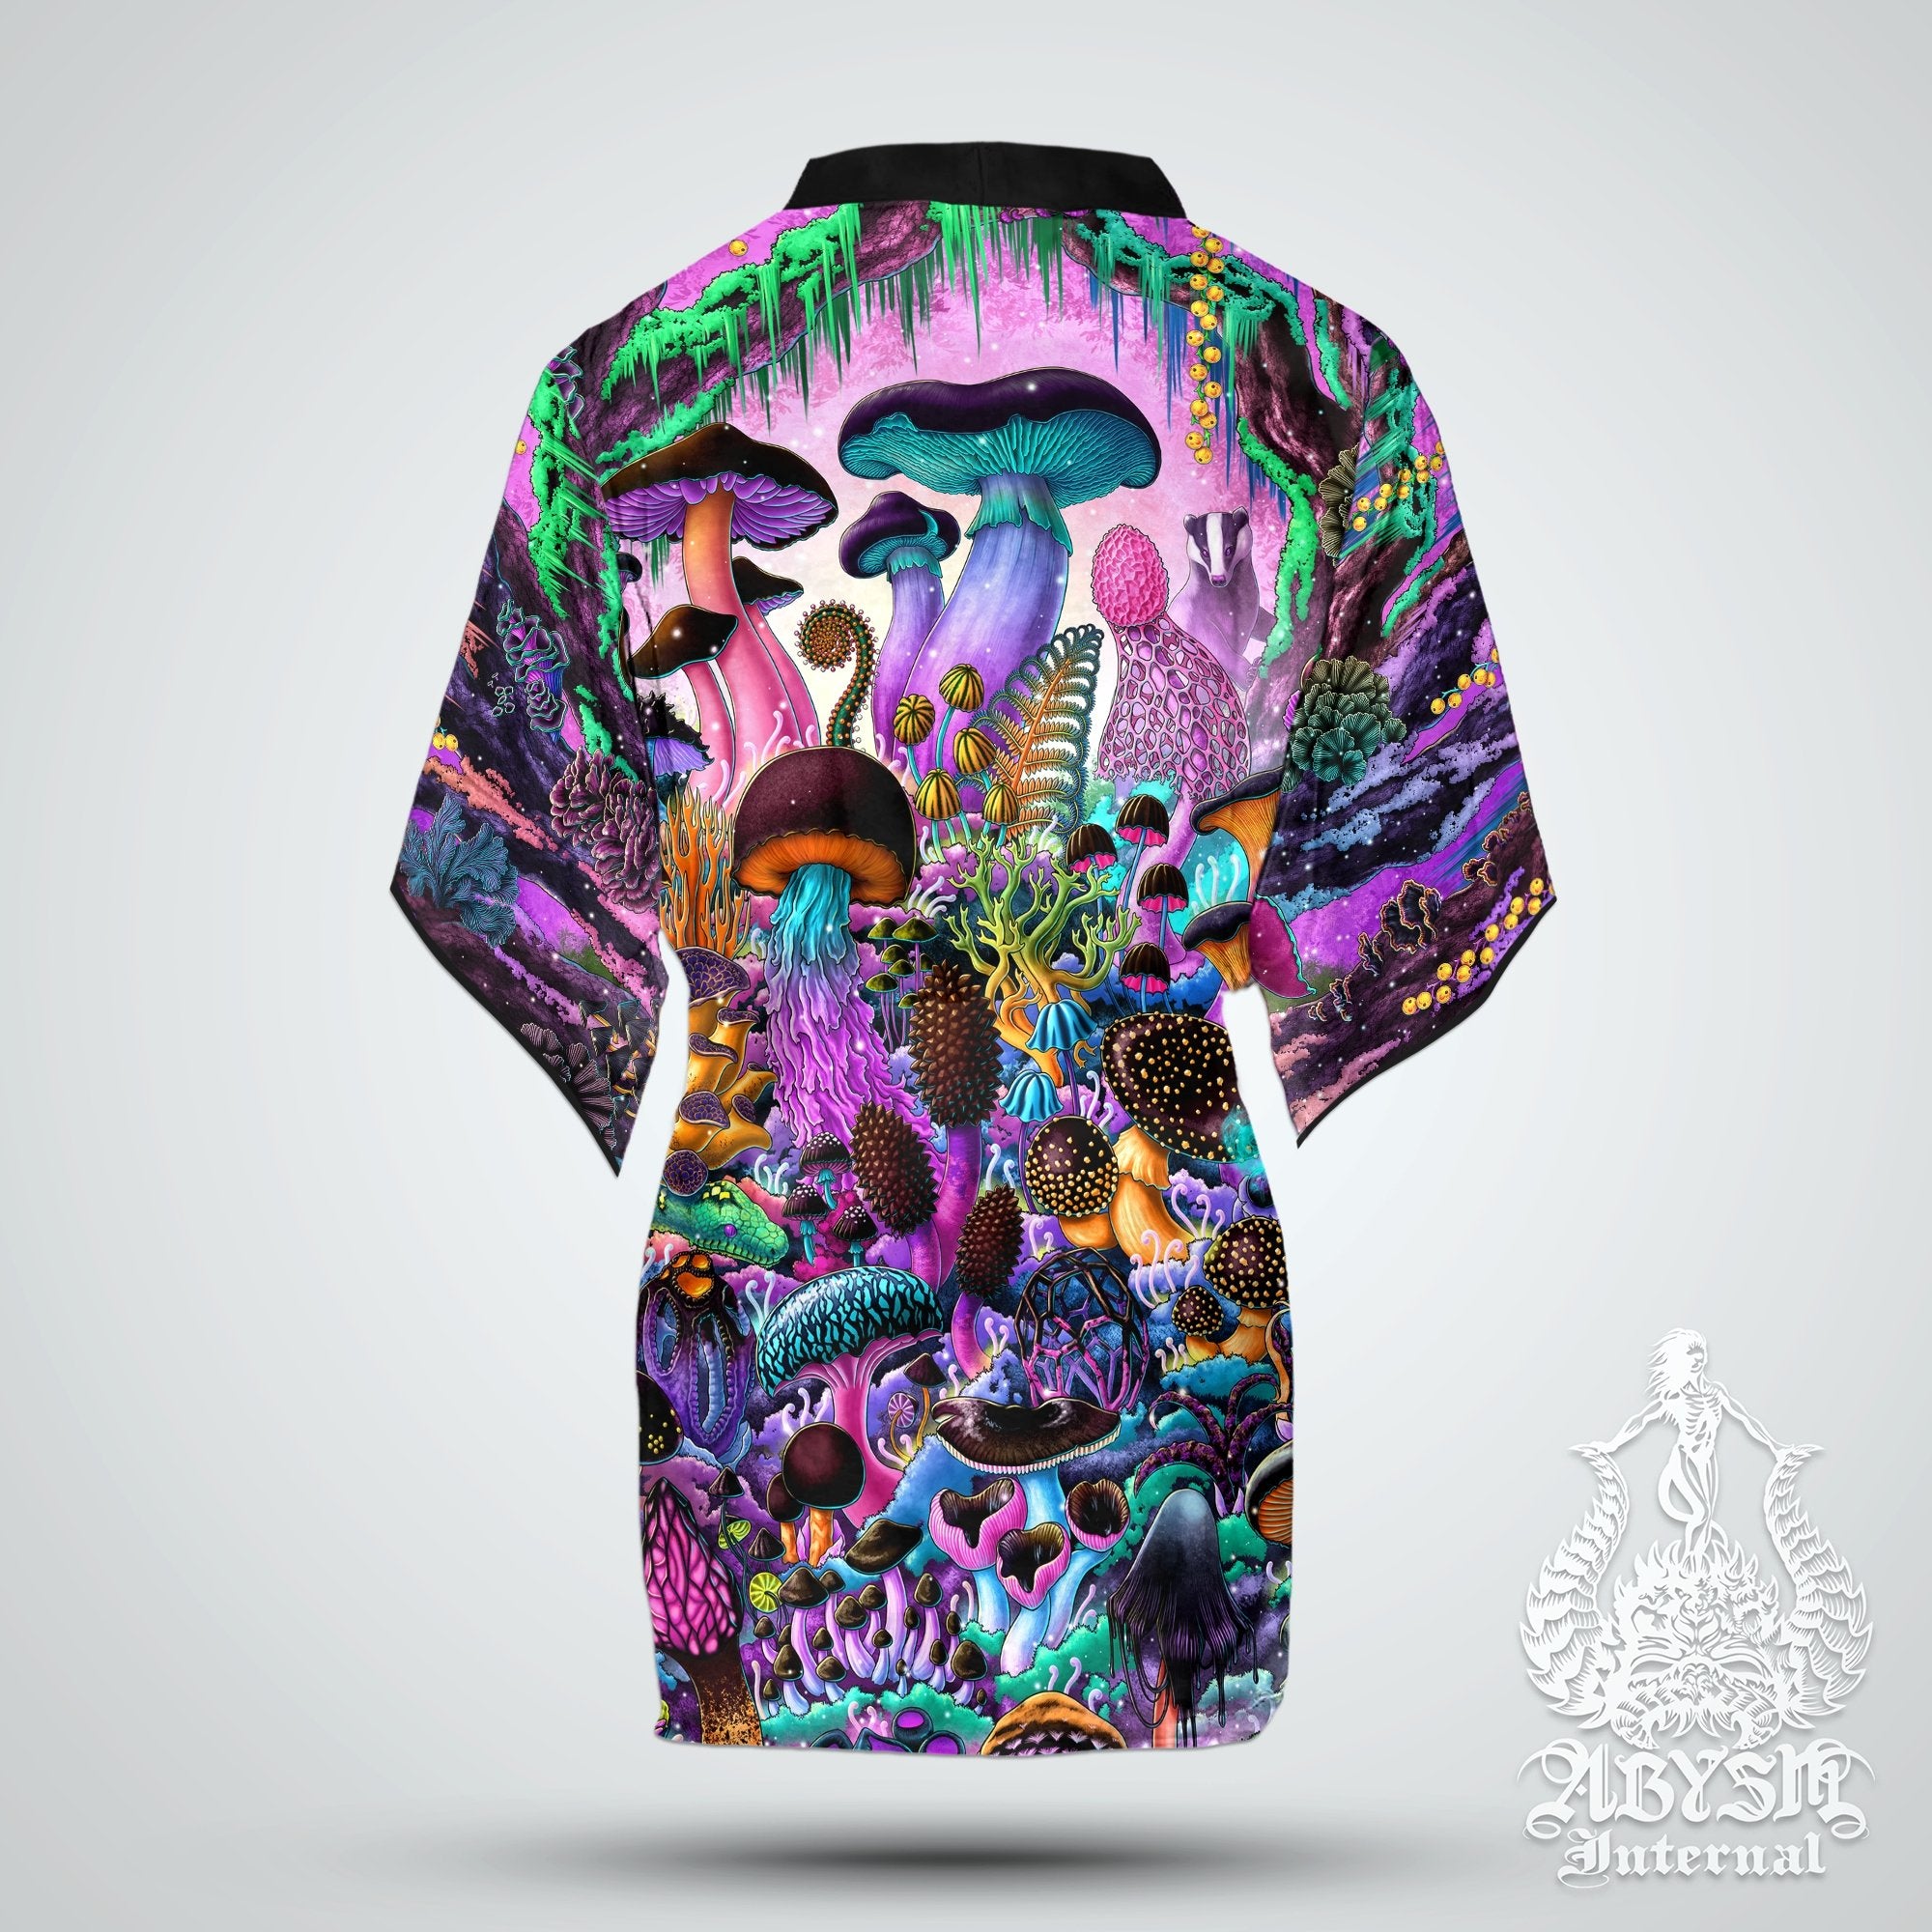 Mushrooms Cover Up, Aesthetic Outfit, Indie Party Kimono, Summer Festival Robe, Psychedelic Magic Shrooms Gift, Alternative Clothing, Unisex - Pastel Black - Abysm Internal